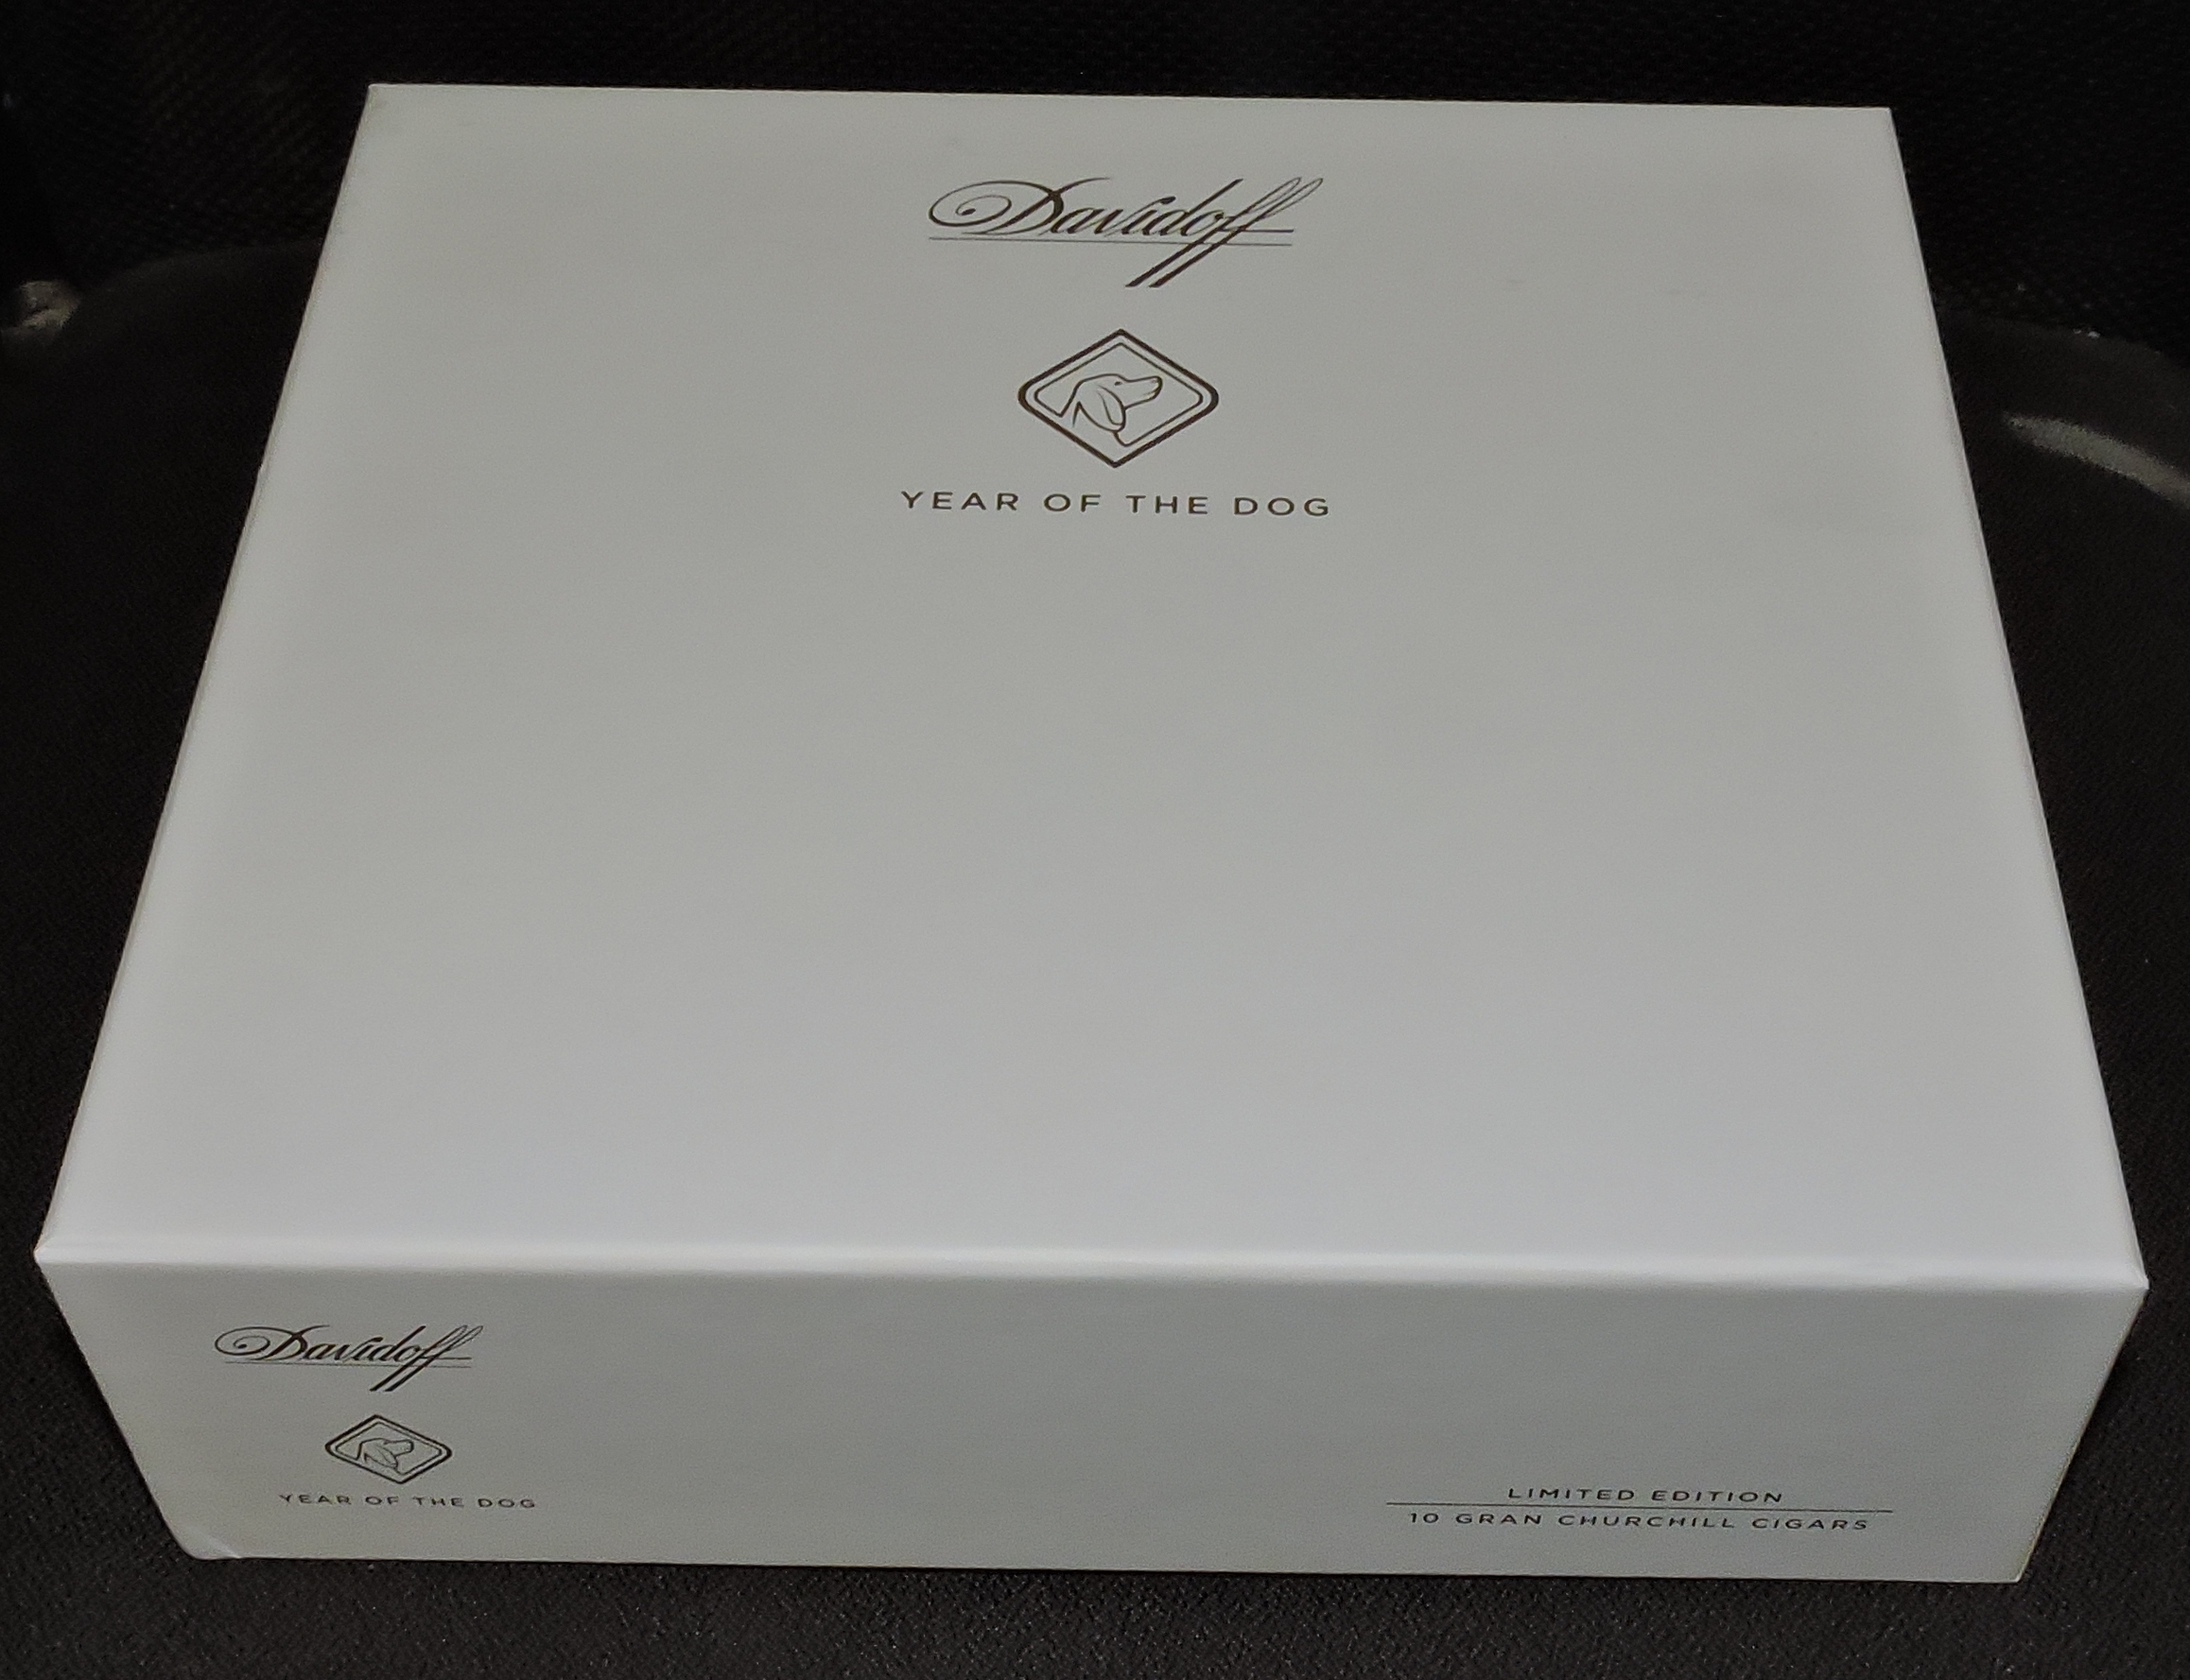 Davidoff Year of the Dog - Packaging